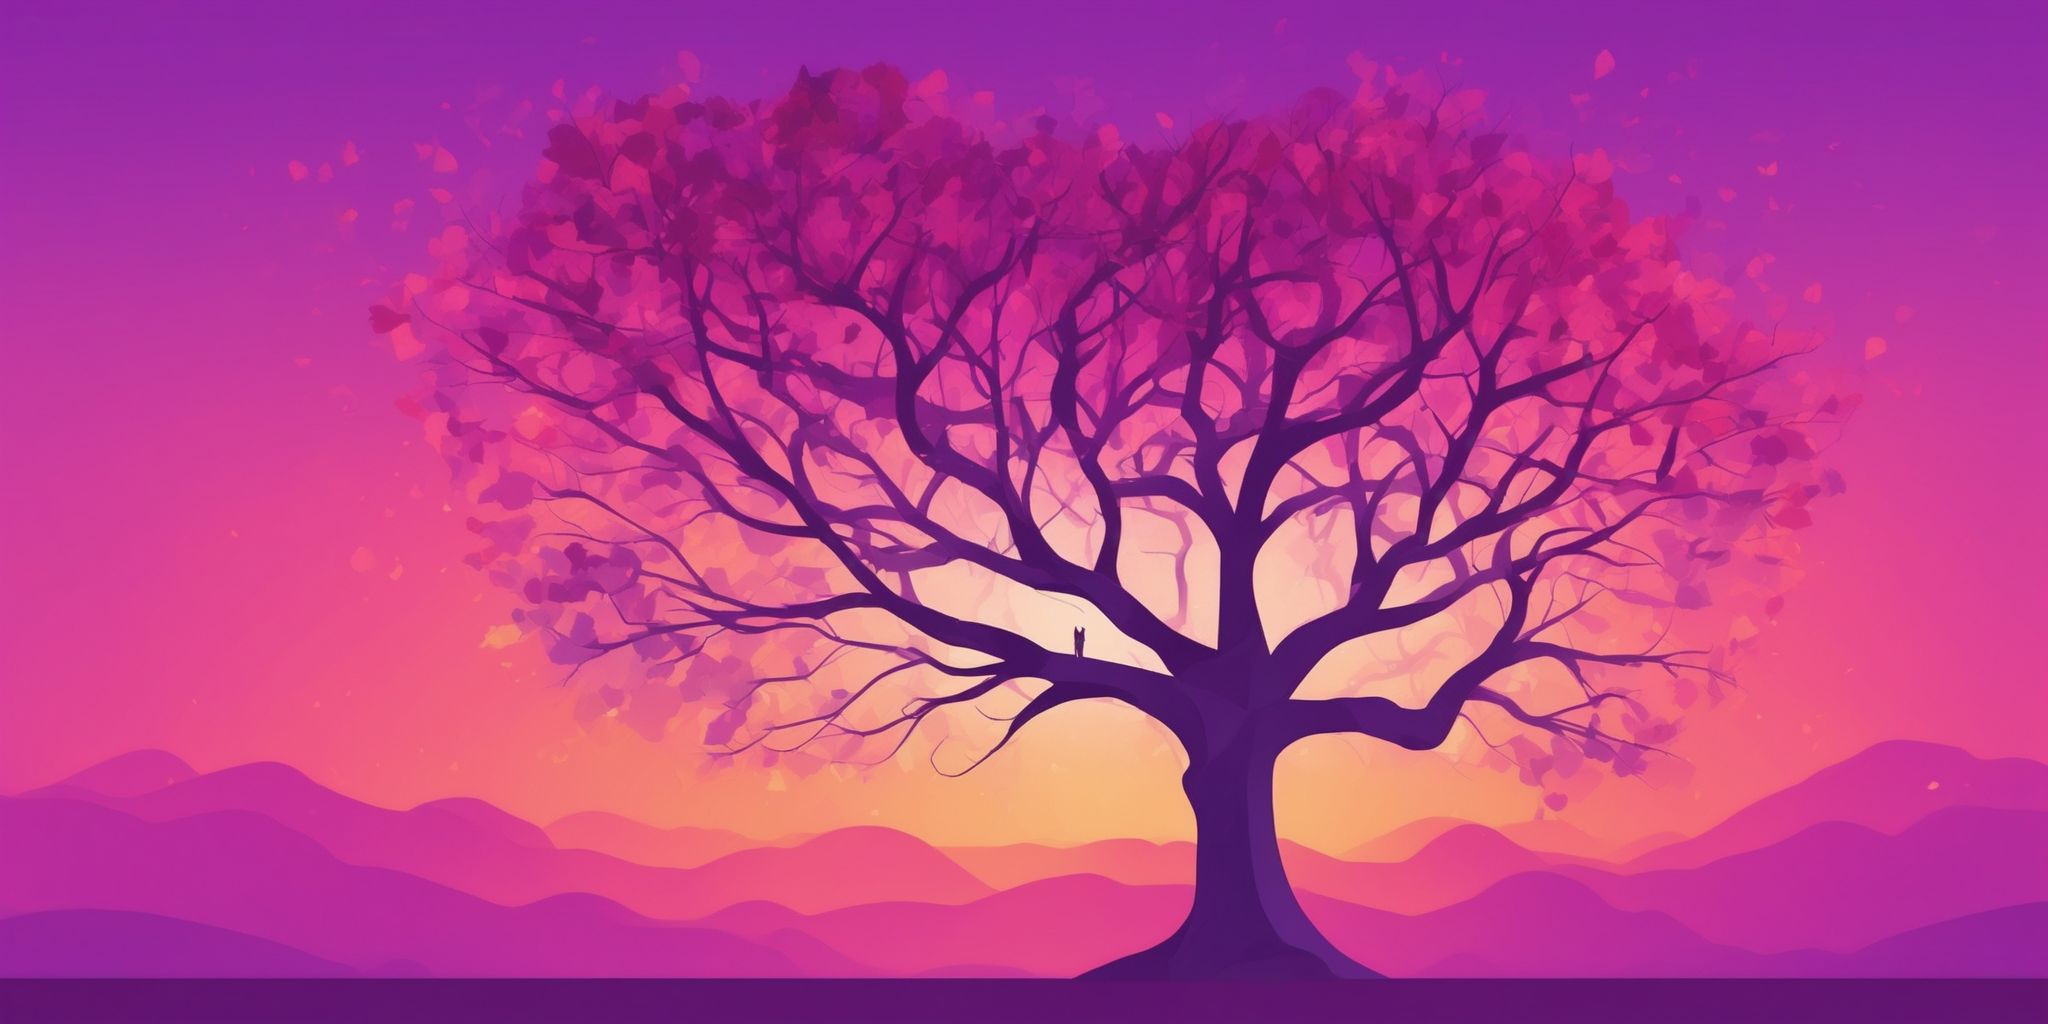 Image Metaphor: Tree in flat illustration style, colorful purple gradient colors